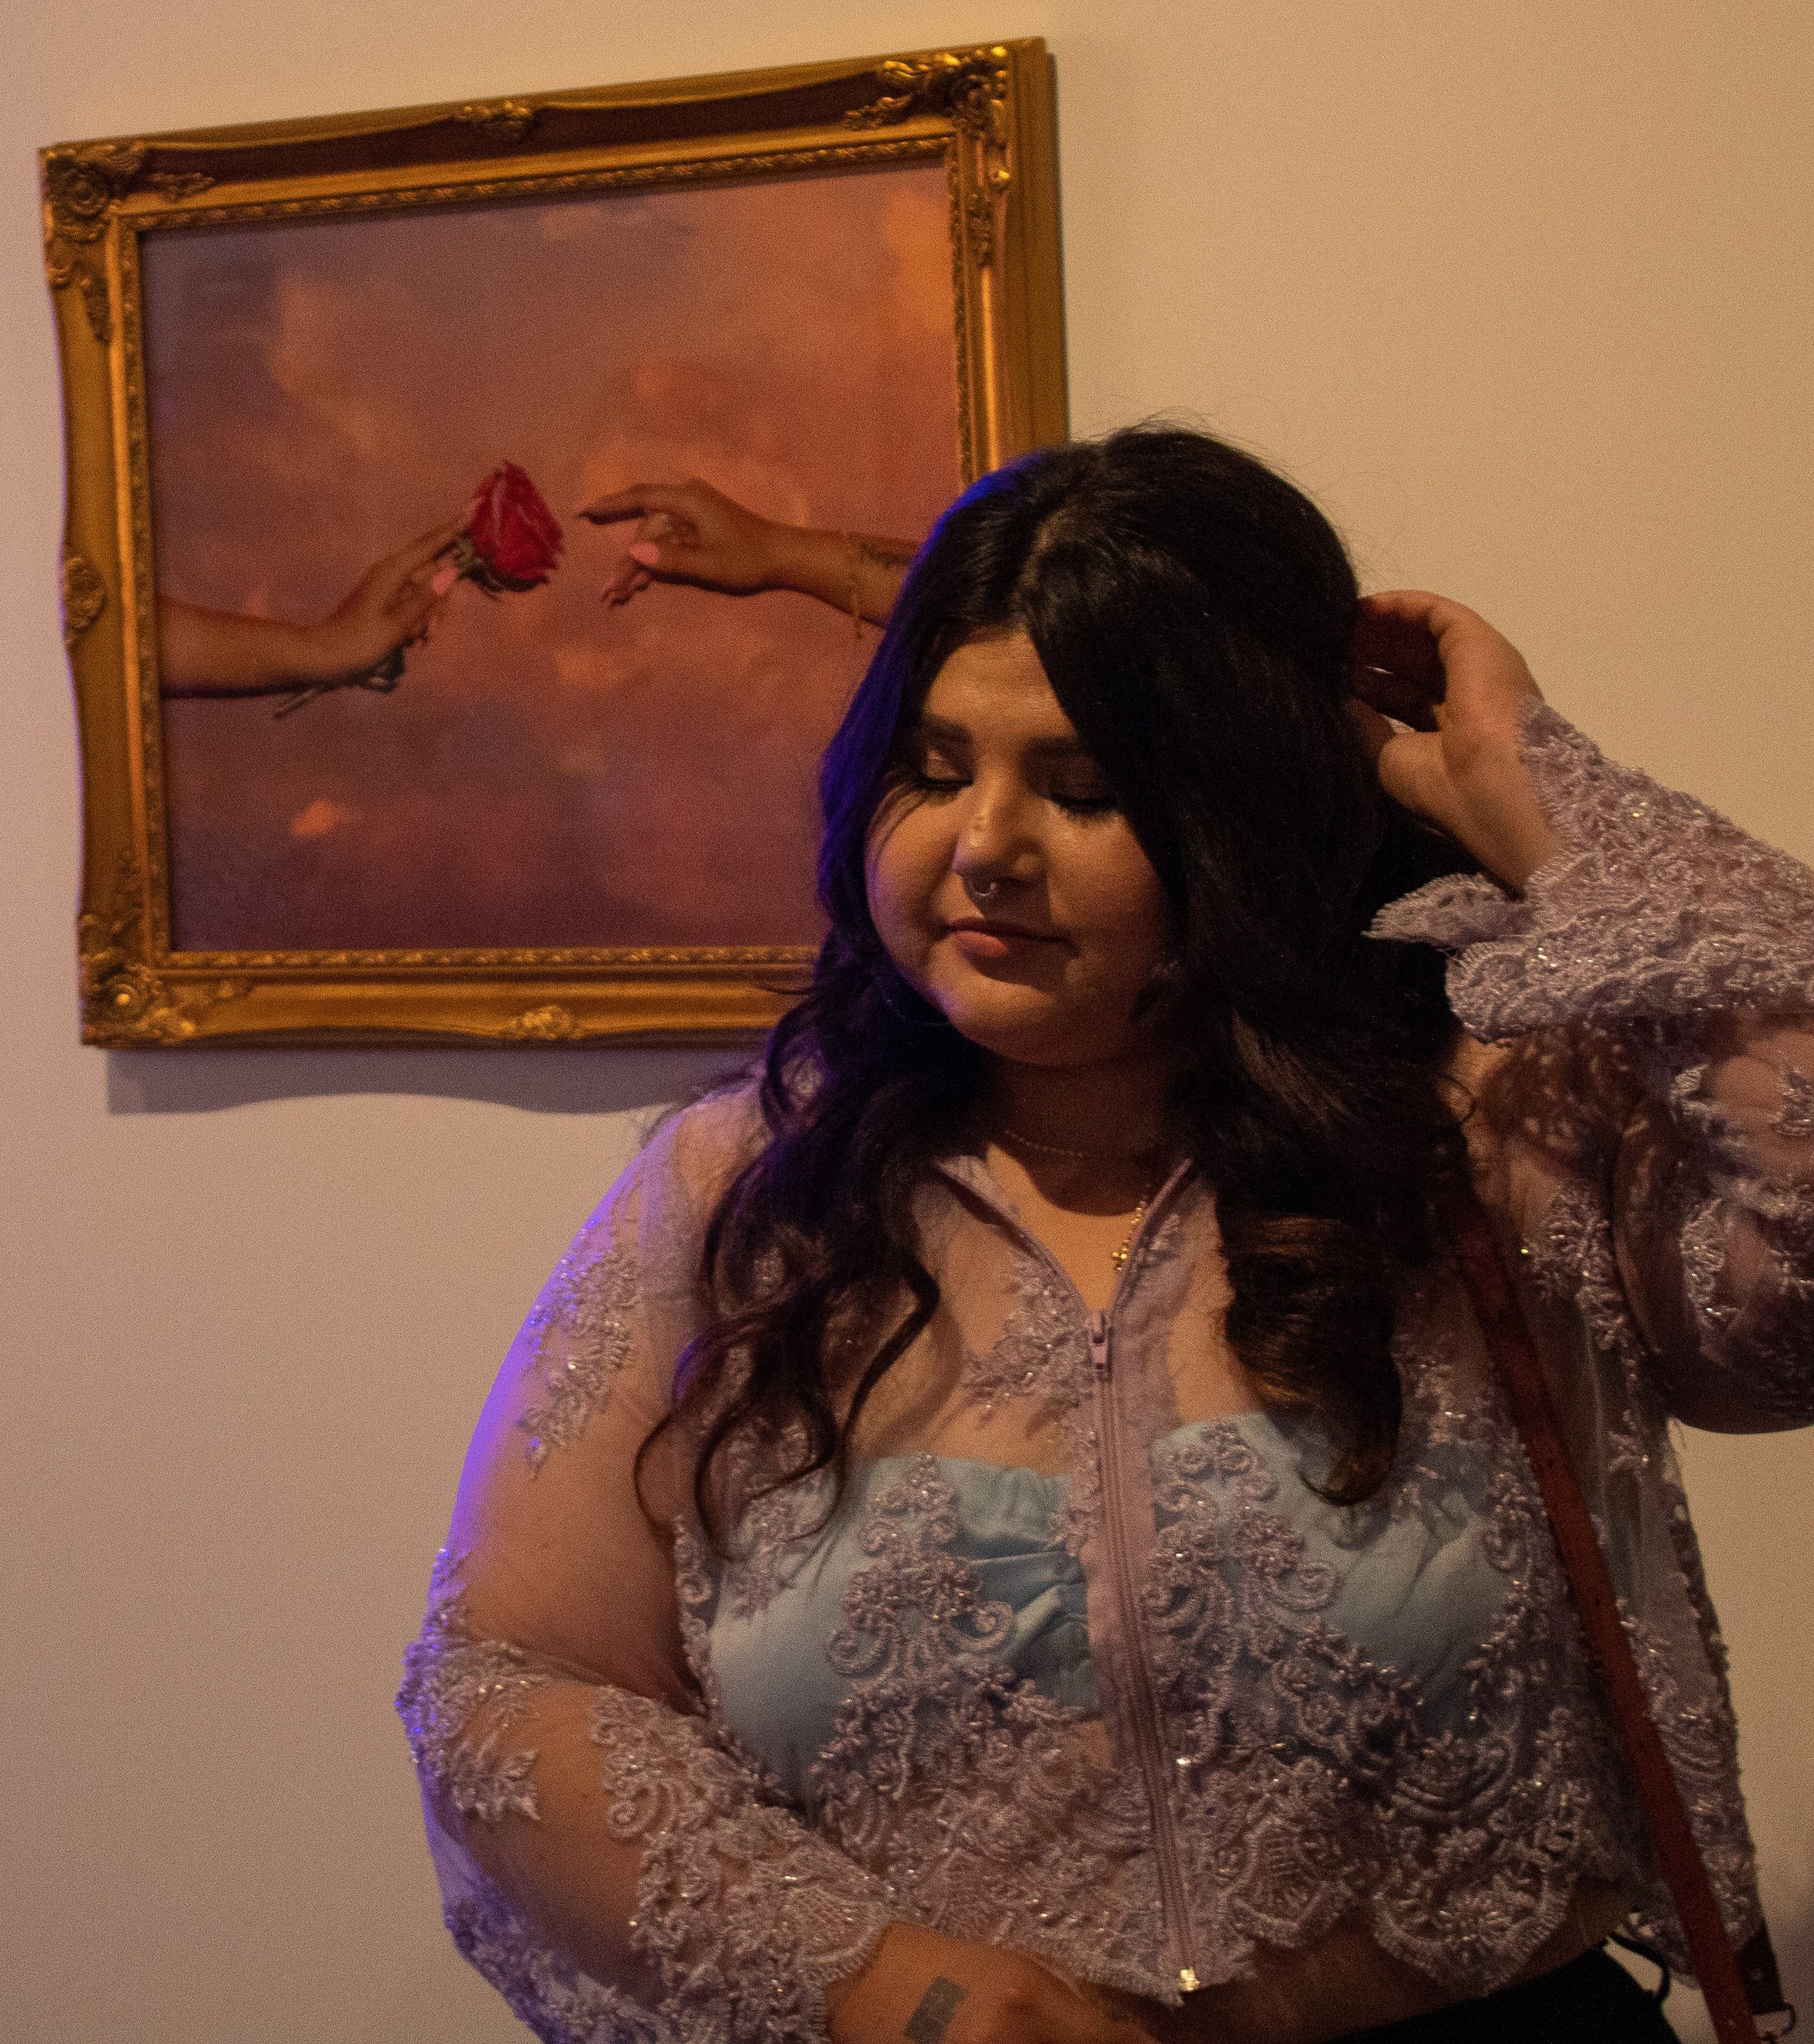  Artist Adriana Serrato in front of her work at We Rise in Los Angeles, California on May 17, 2019. "So pretty much all my pieces are inspired by brown mujeres and cultura and really trying to like represent us because I know in media we aren't reall